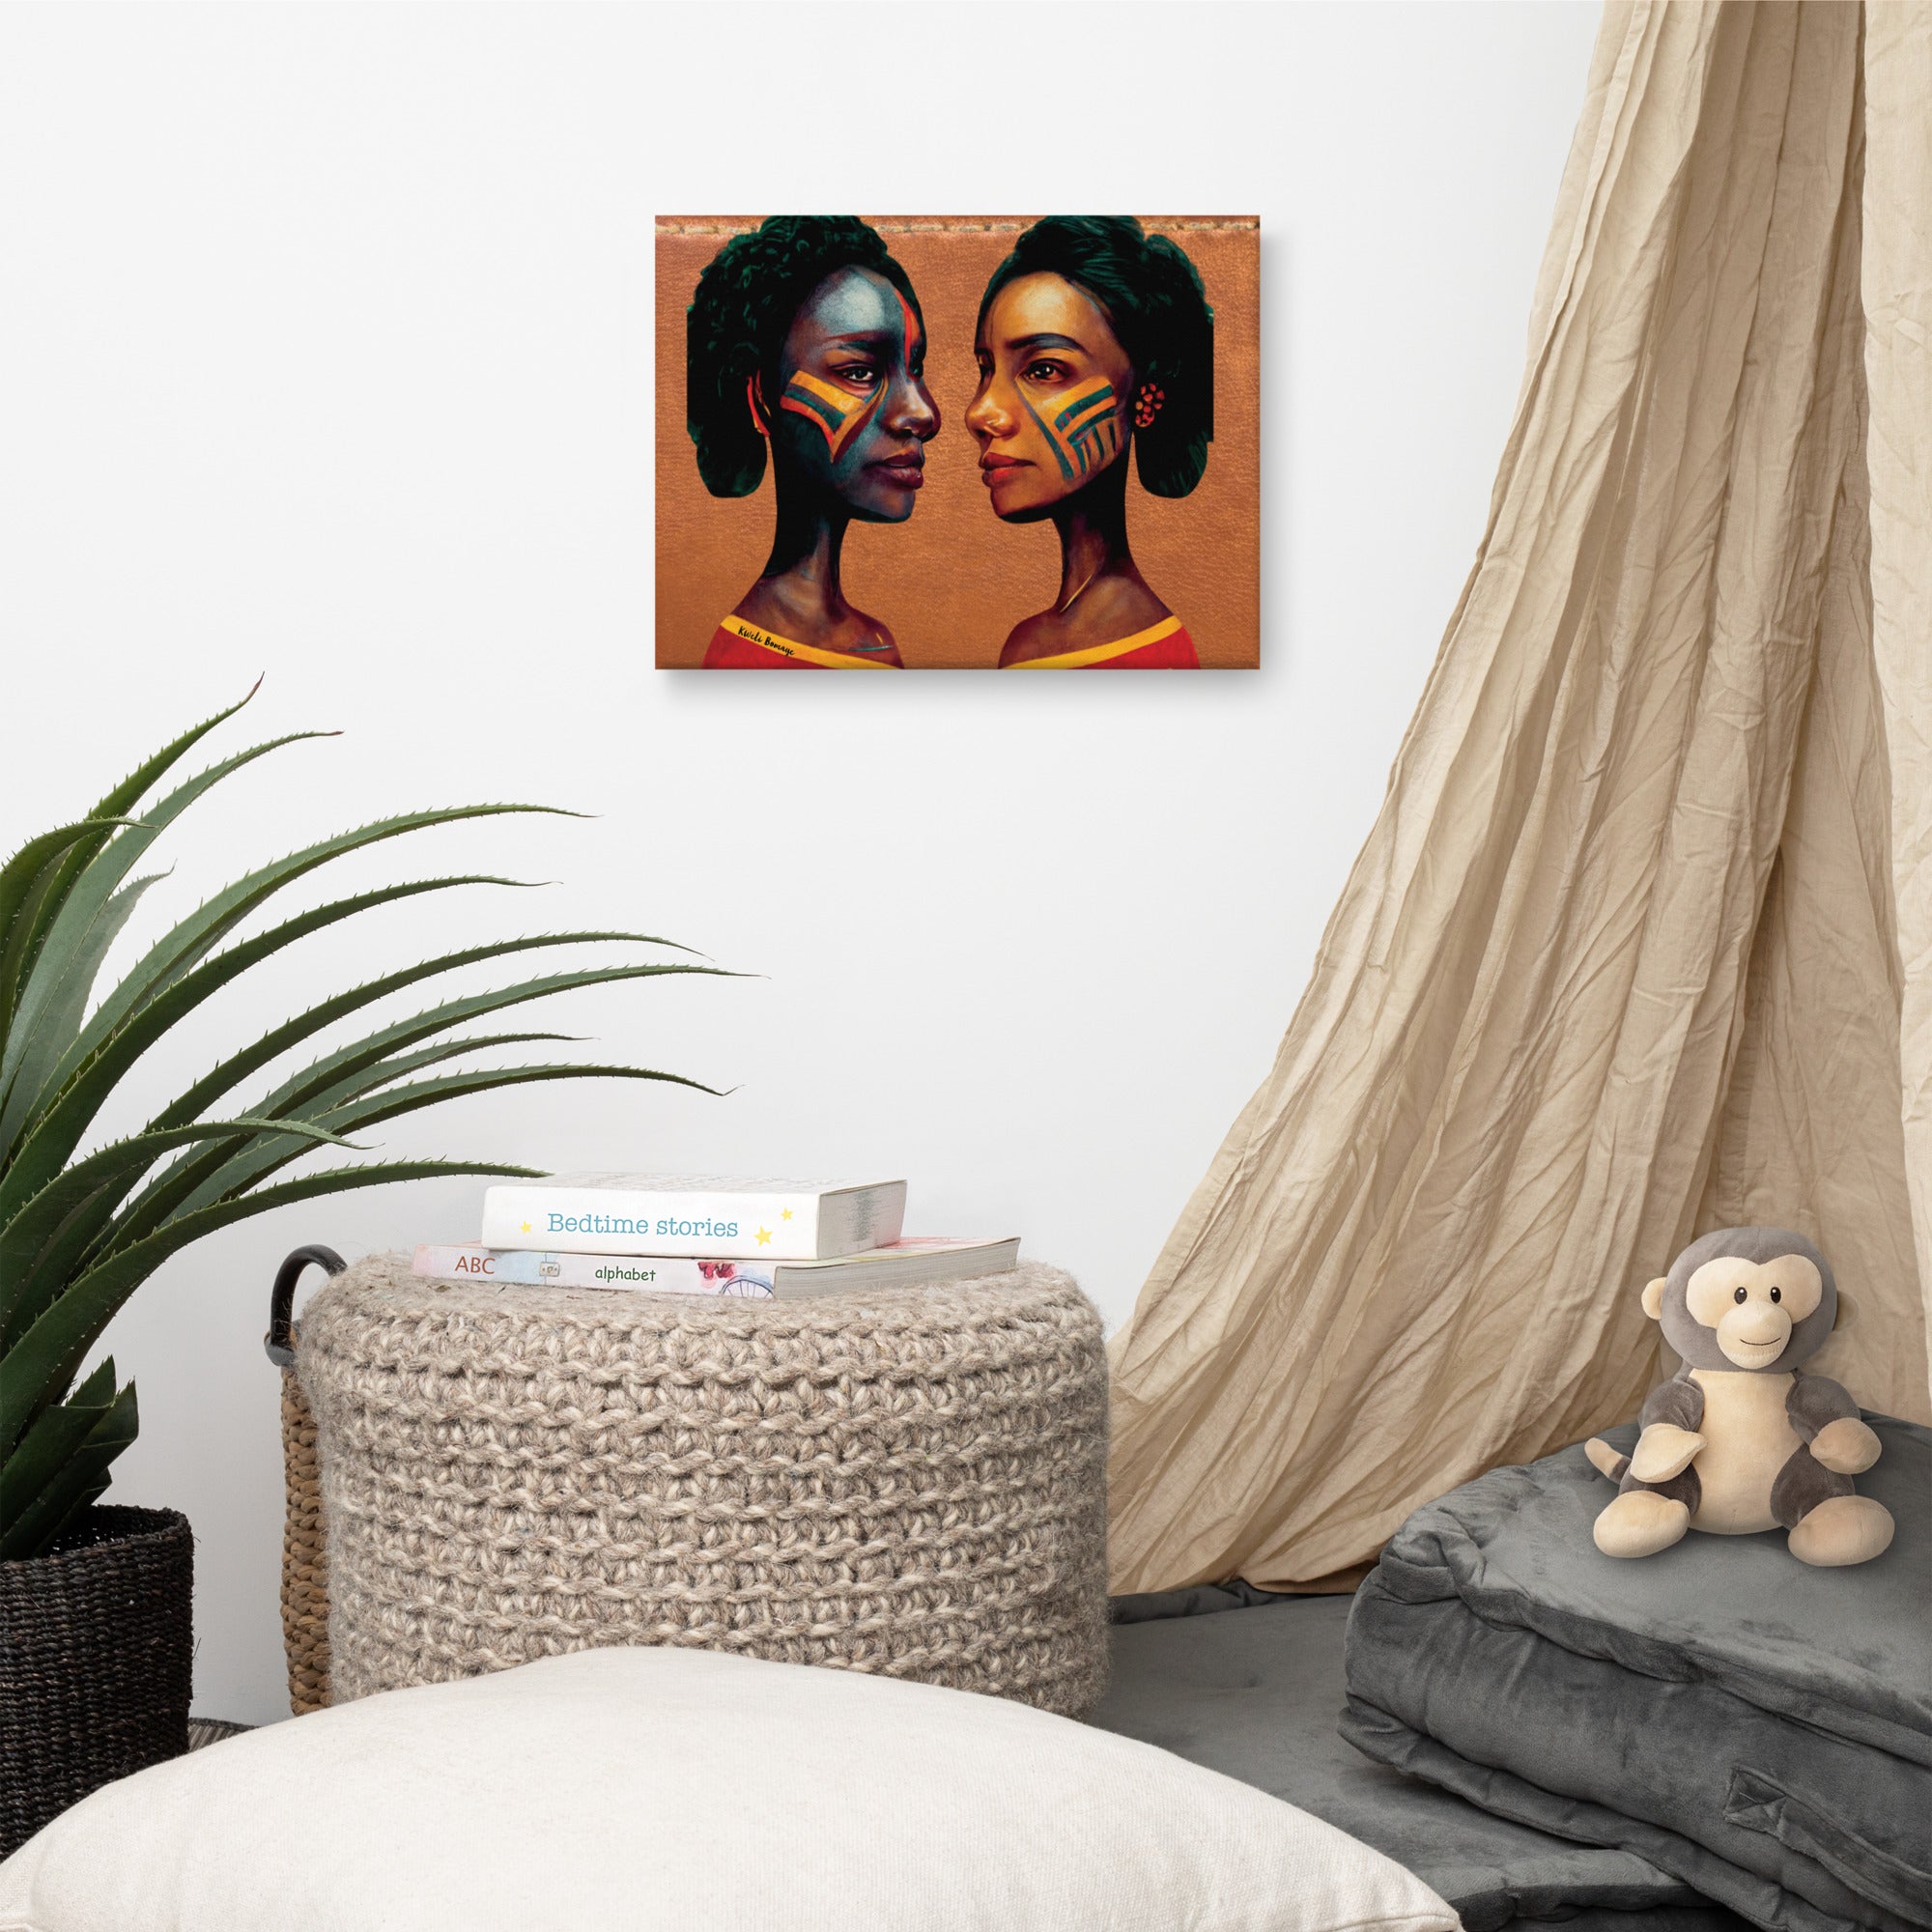 "She Is Me" - Canvas Print